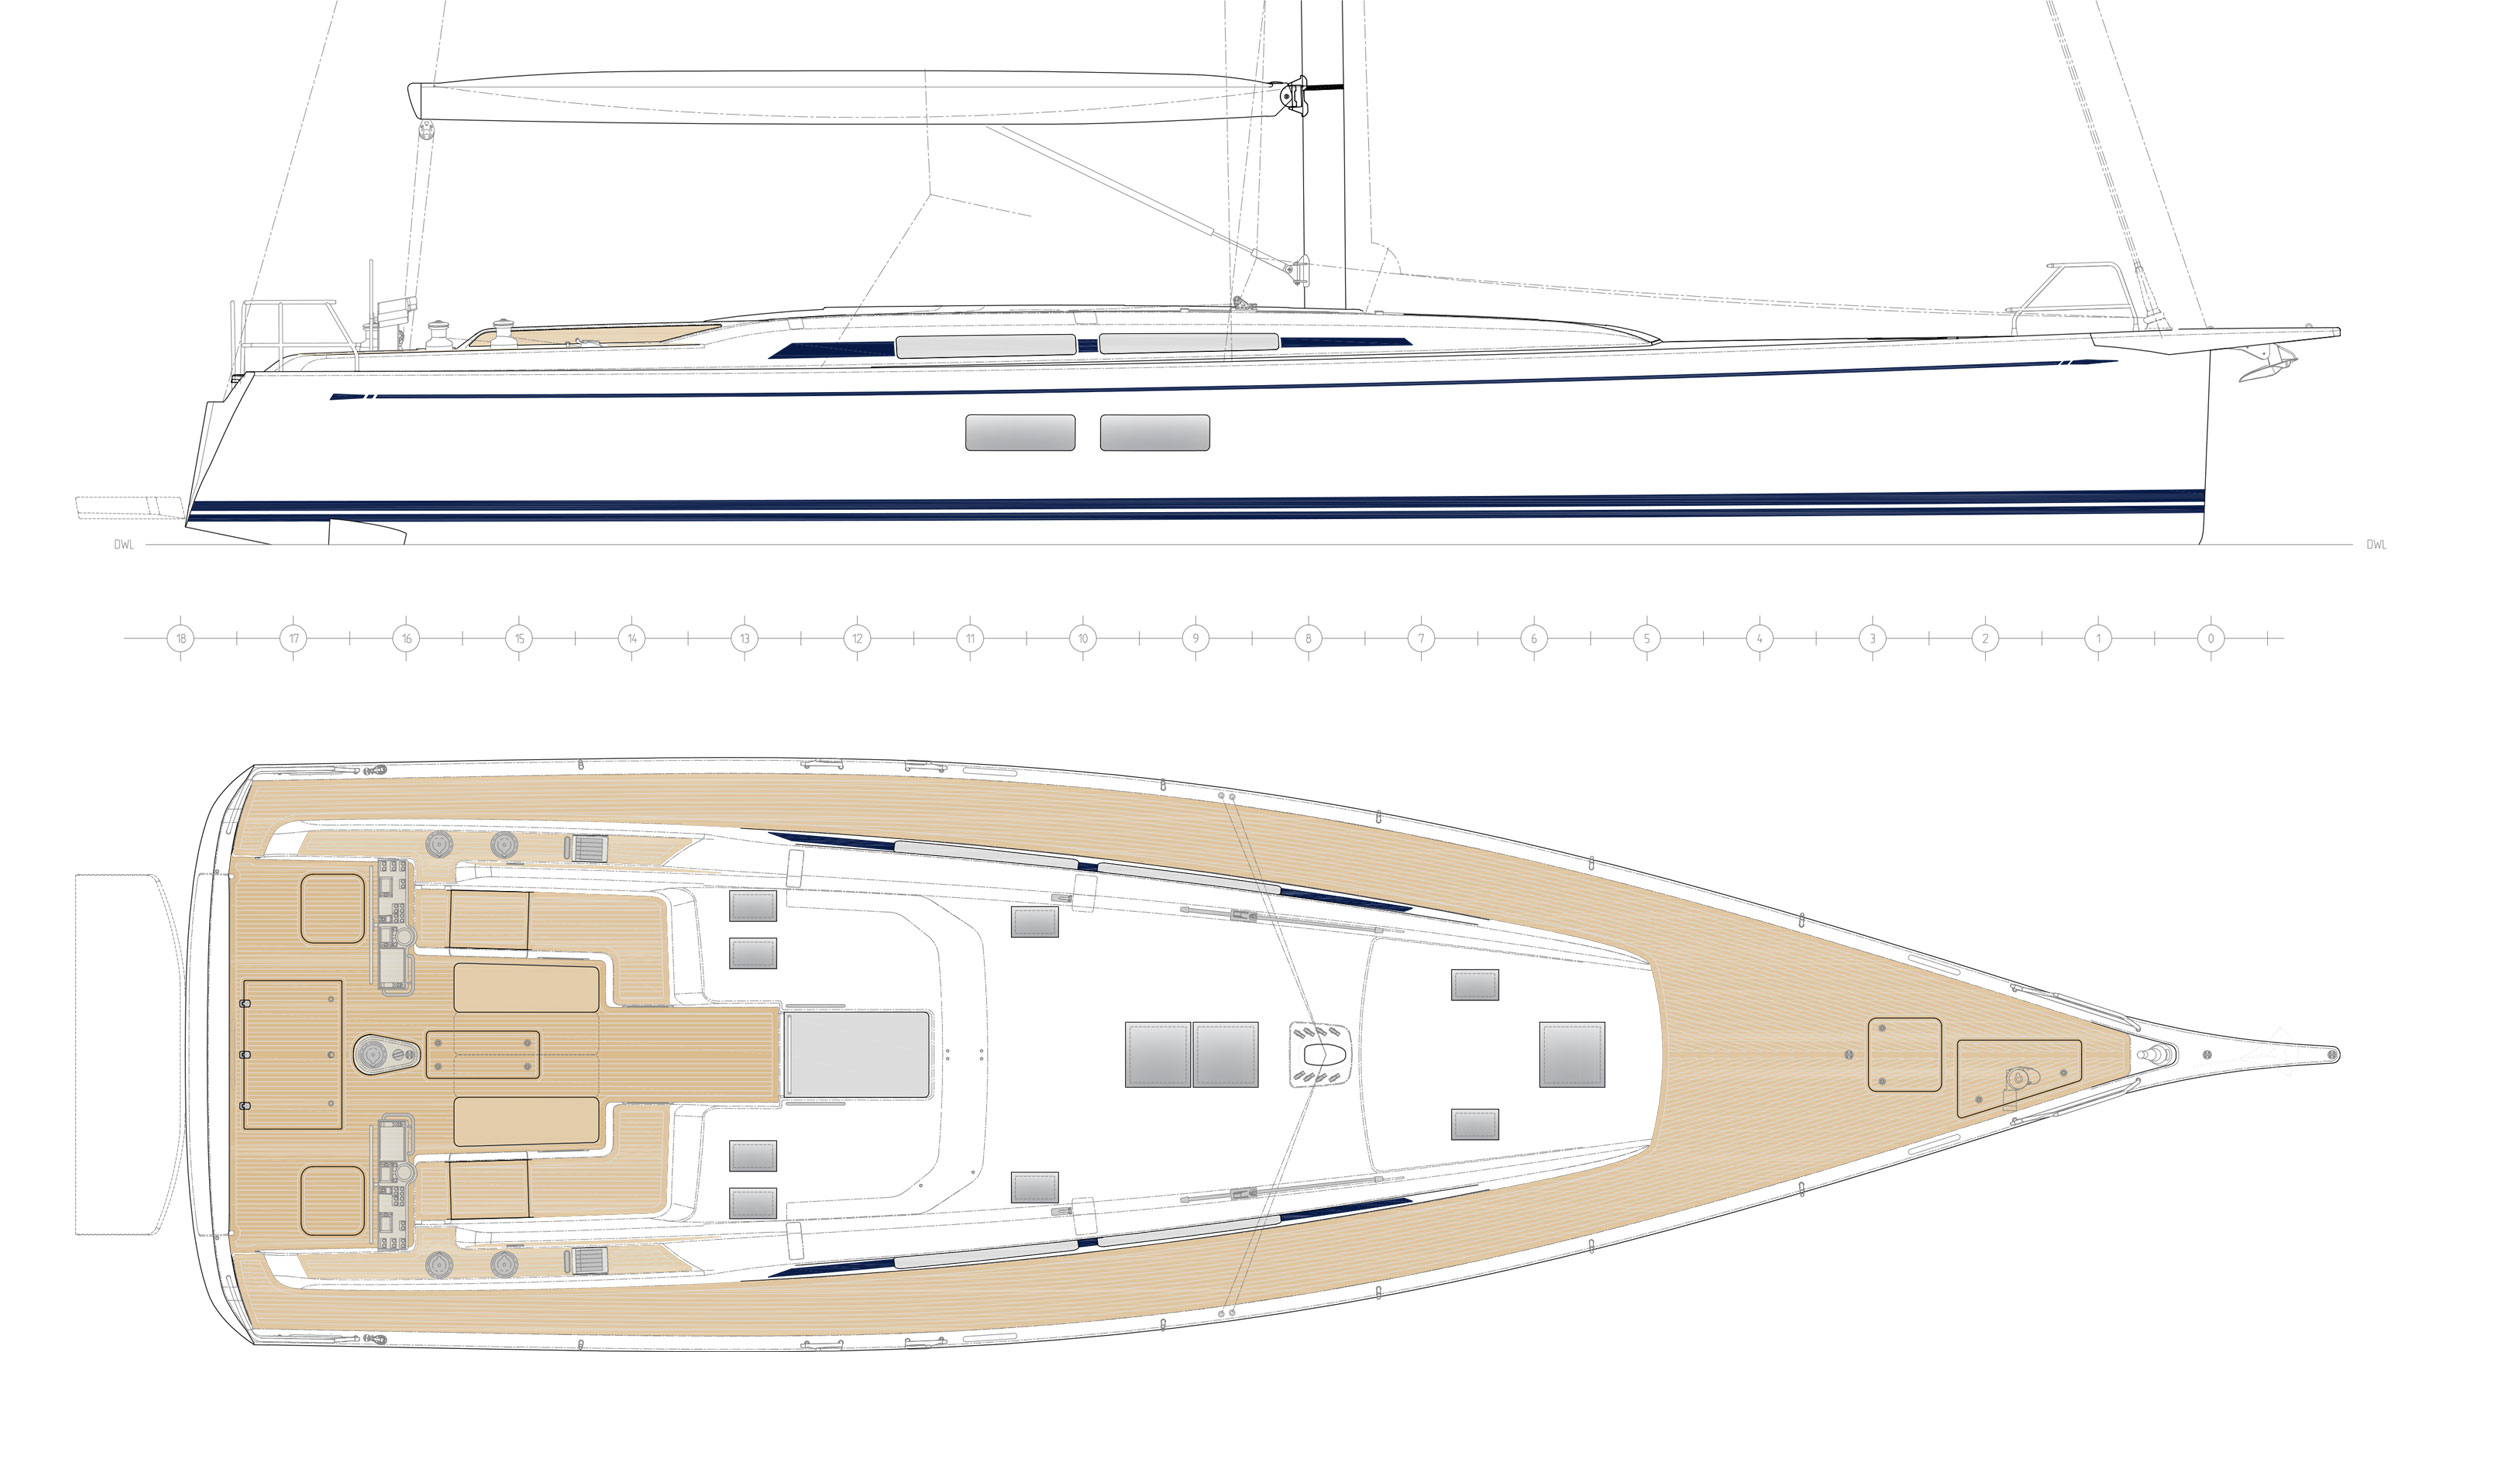 58 foot yacht price